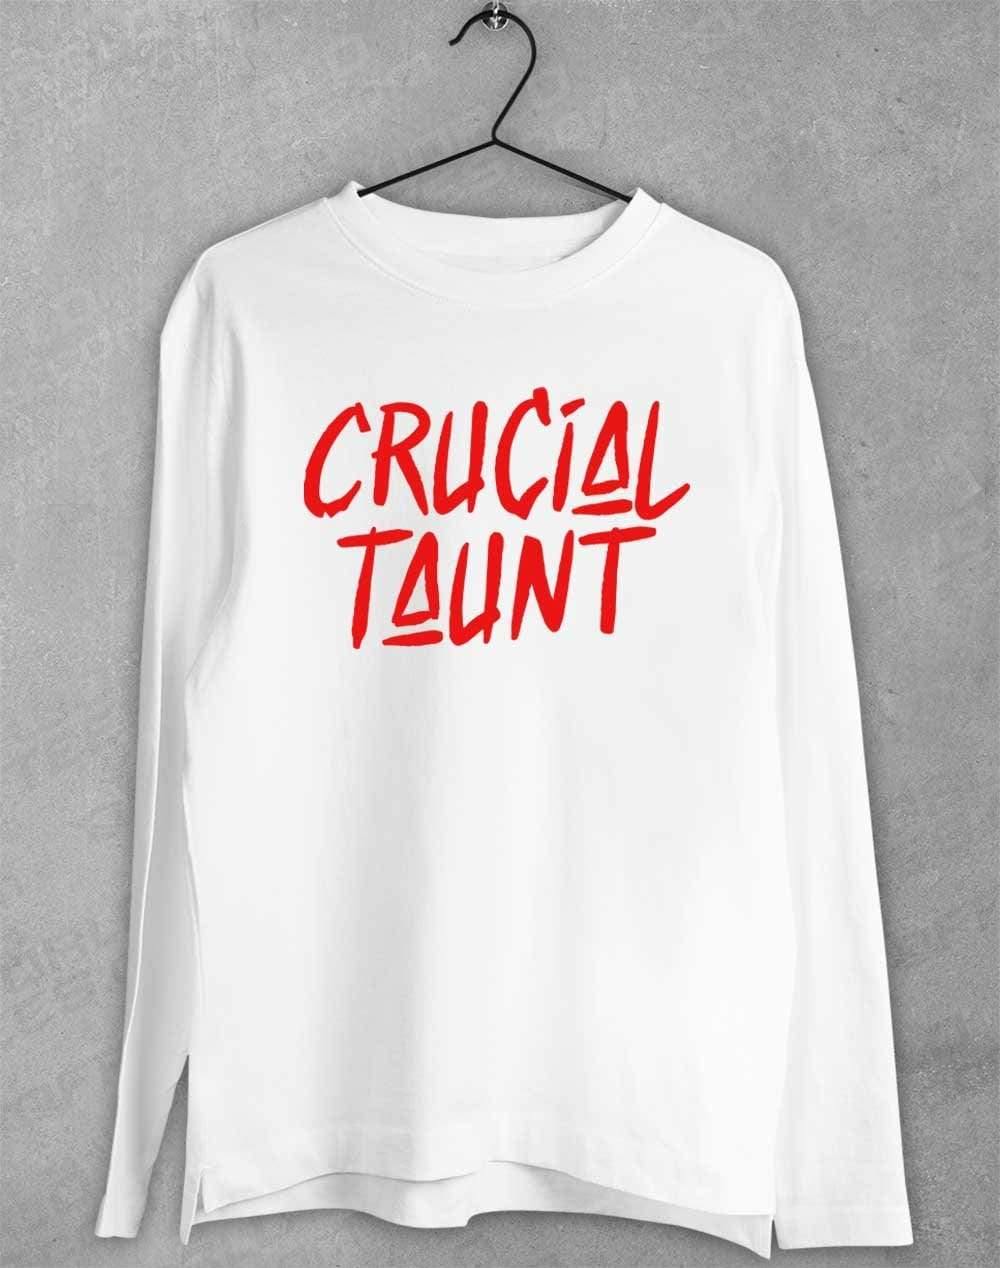 Crucial Taunt Long Sleeve T-Shirt S / White  - Off World Tees